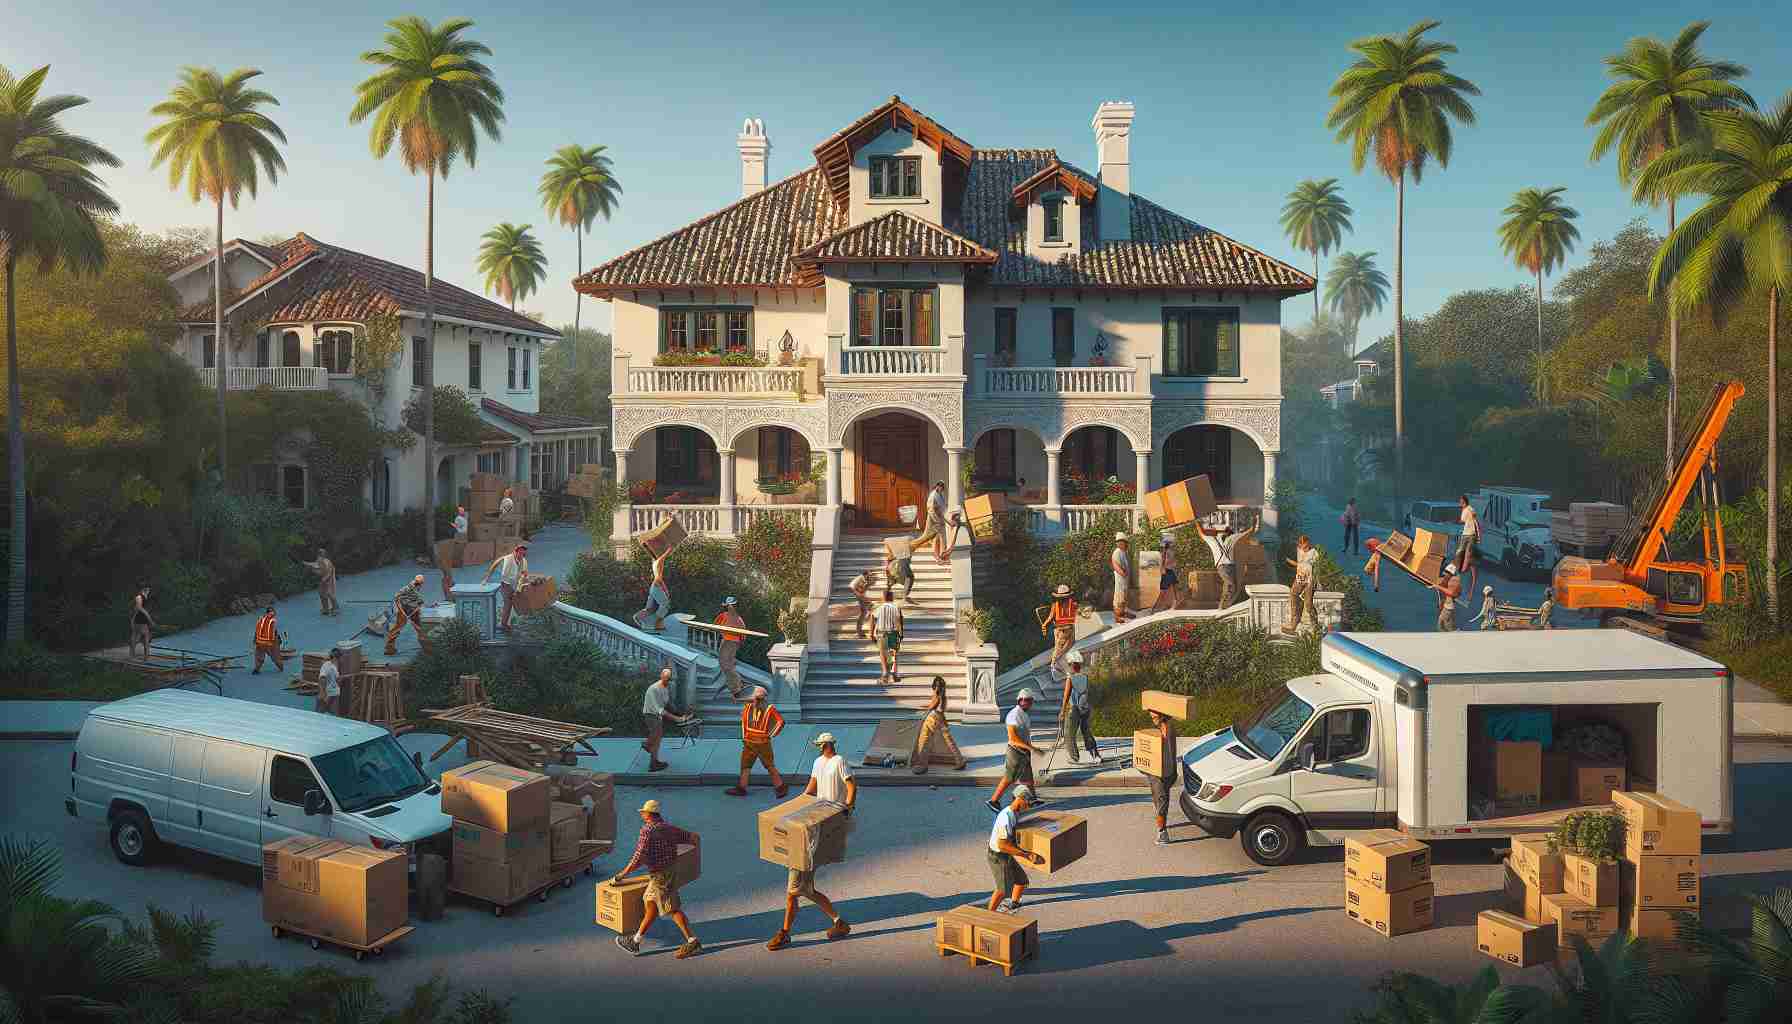 A high-definition, realistic photo of a scene depicting Renovations and Relocation in Palm Beach. The image centers on a charming old house in the process of being renovated, with workers in various stages of the project. The area is bustling with activity, as movers carry boxes and furniture to a moving van nearby. The backdrop is characteristic of Palm Beach, featuring beautiful palm trees and clear, blue skies. Diversity is seen among the workers, with different genders and descents, including Caucasian, Black, Hispanic and South Asian individuals actively involved in the work.